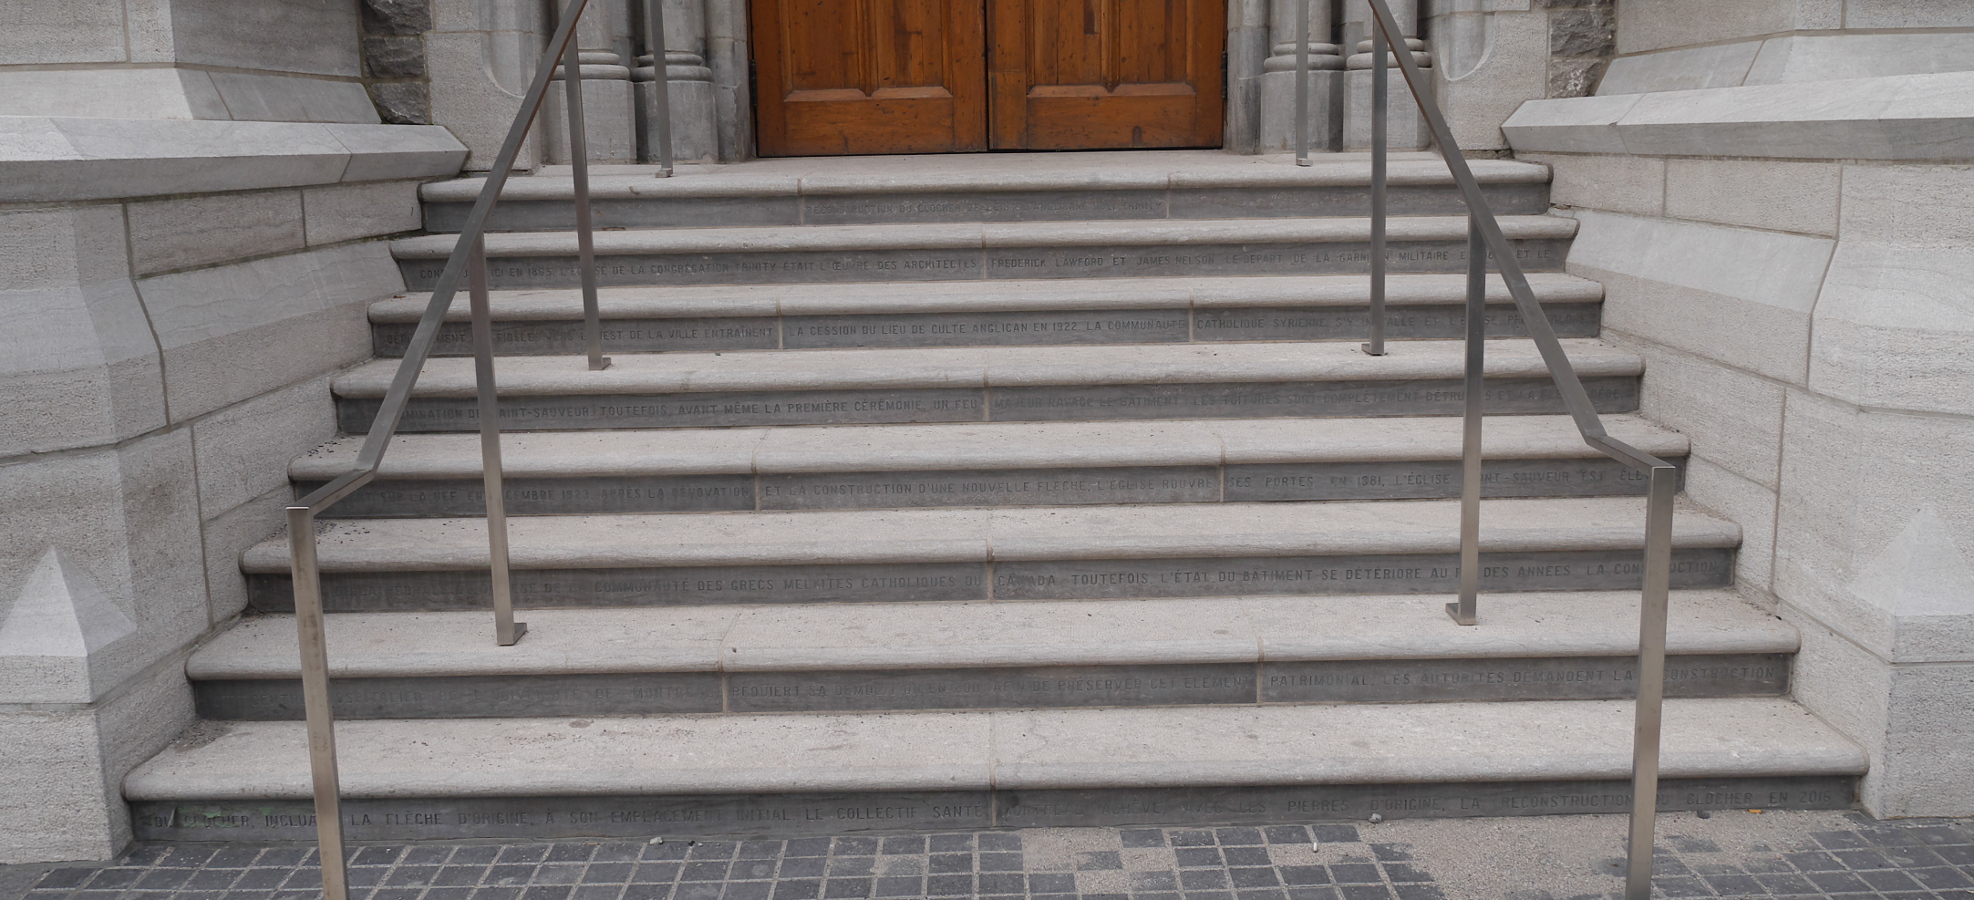 The story of Trinity Anglican Church is inscribed in the reconstructed steps below the doorway.